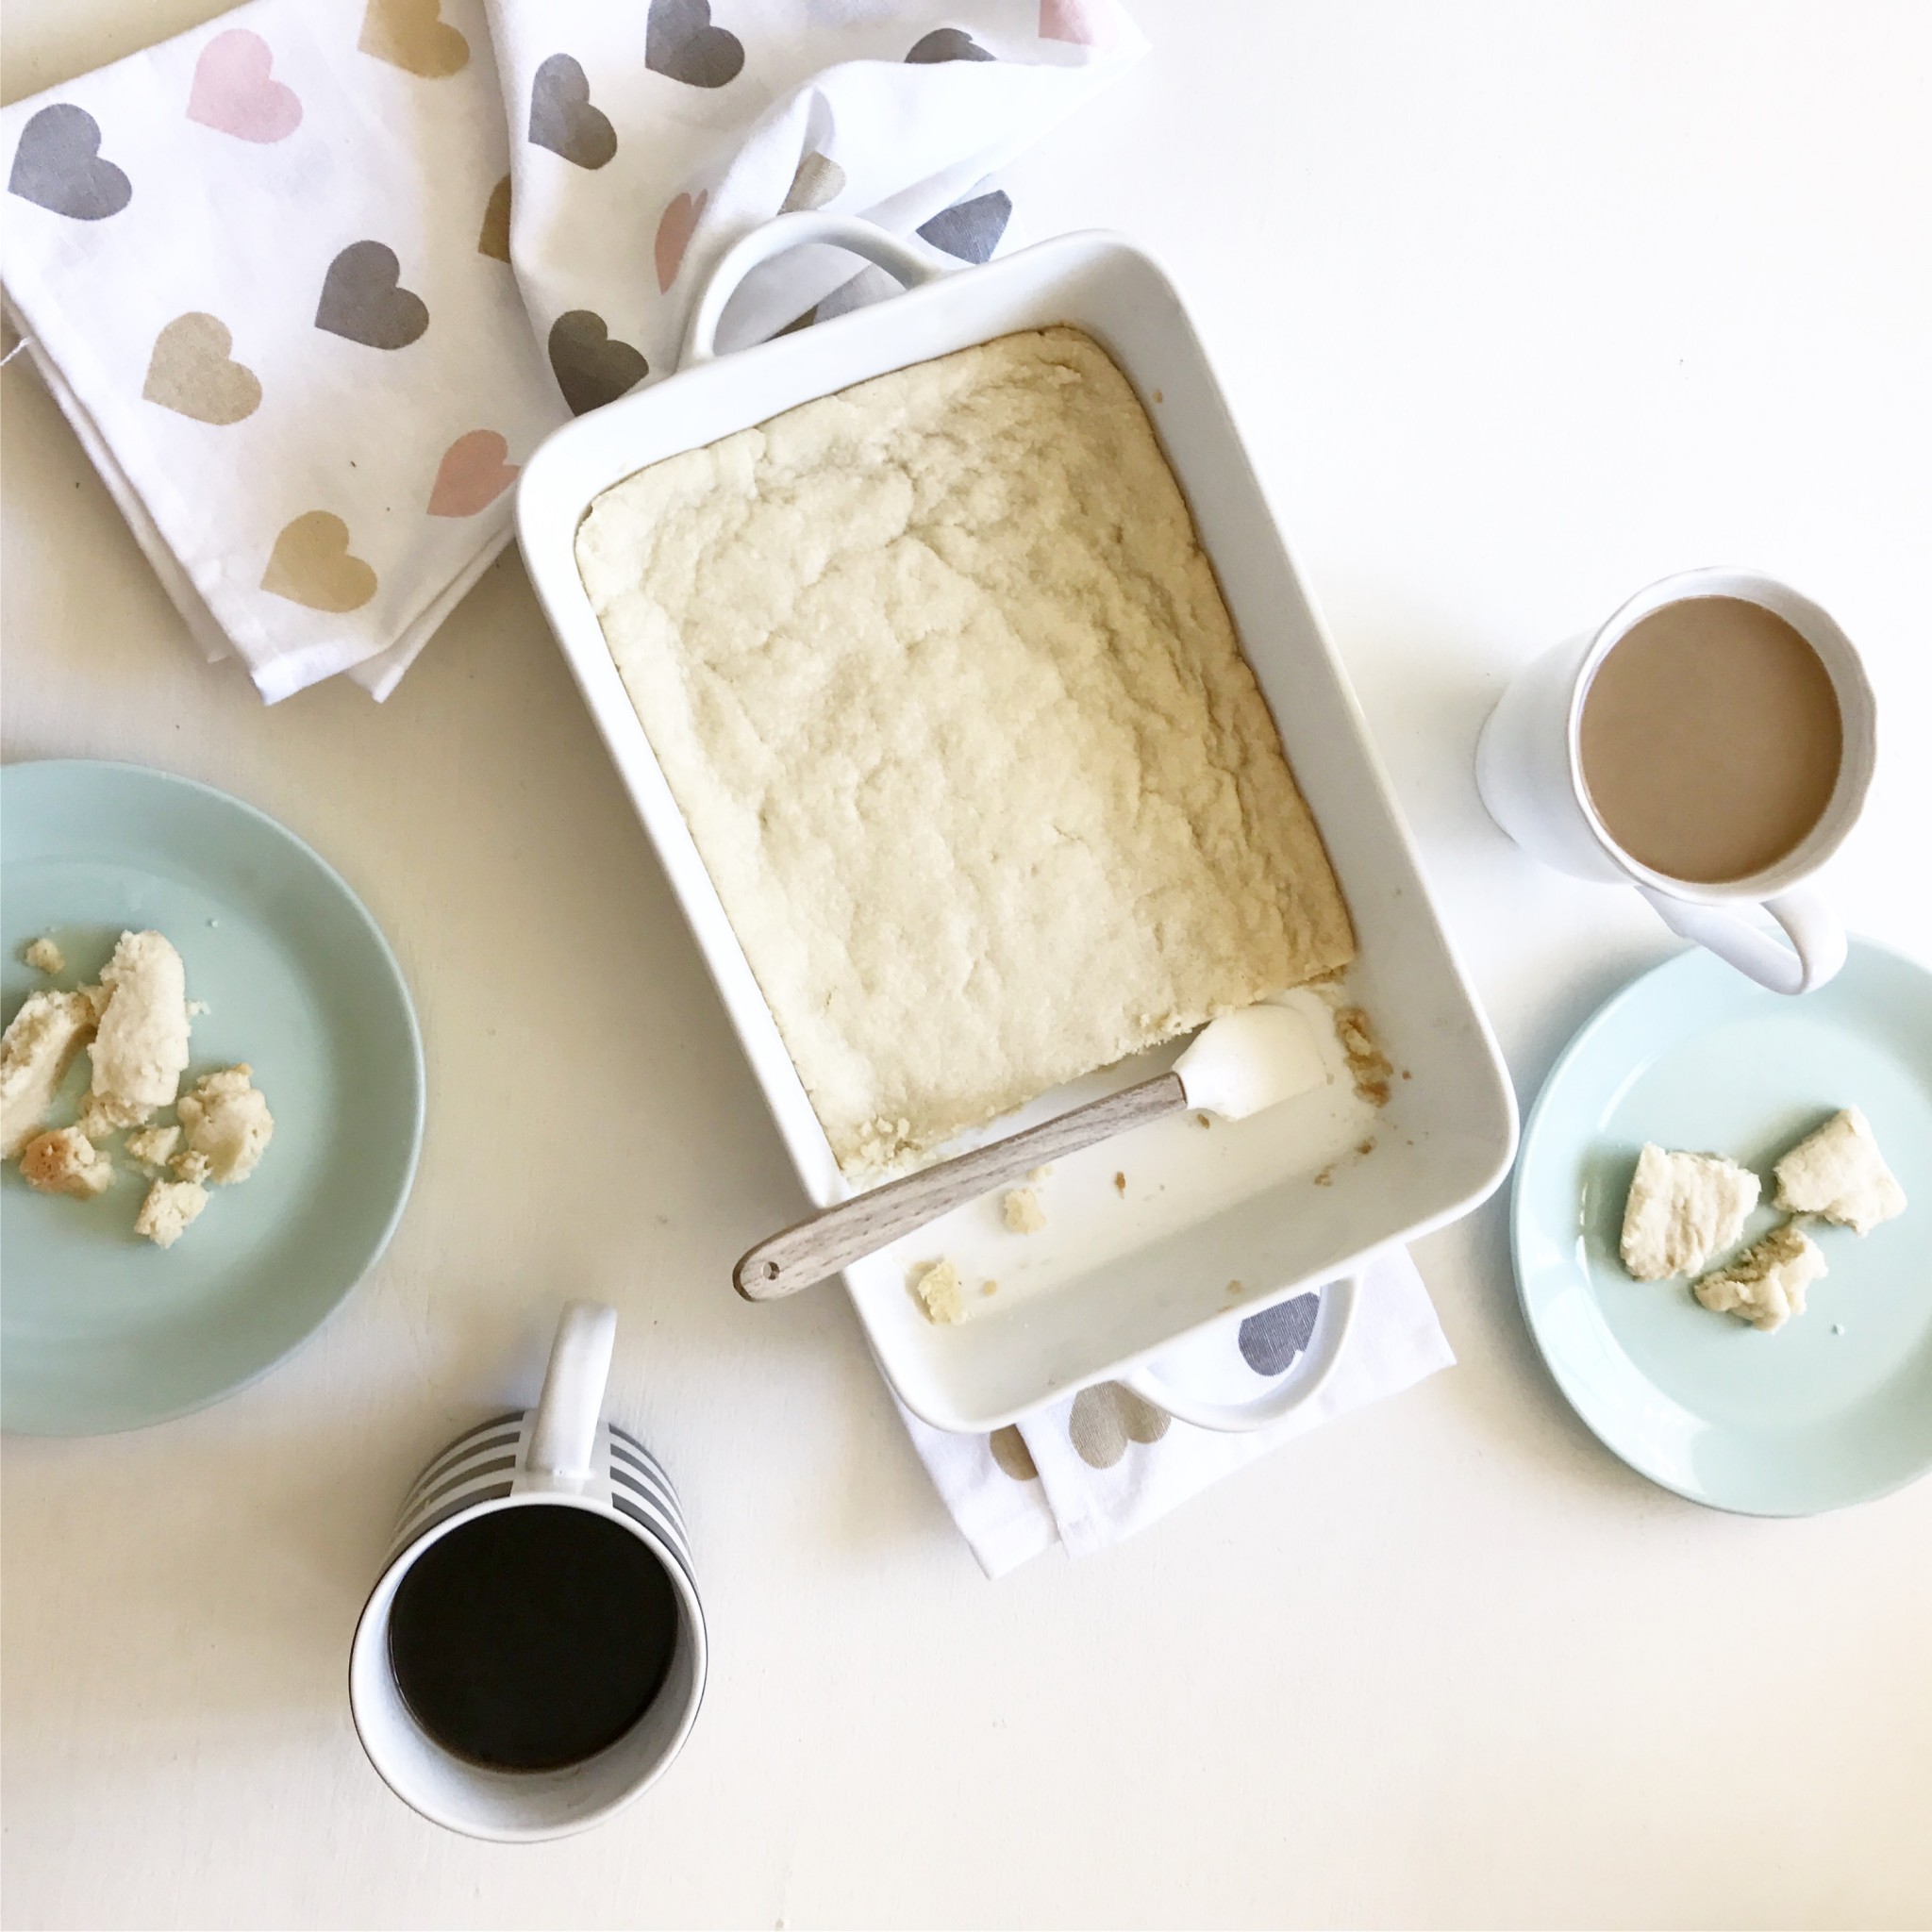 Homemade shortbread recipe in a white dish with coffee